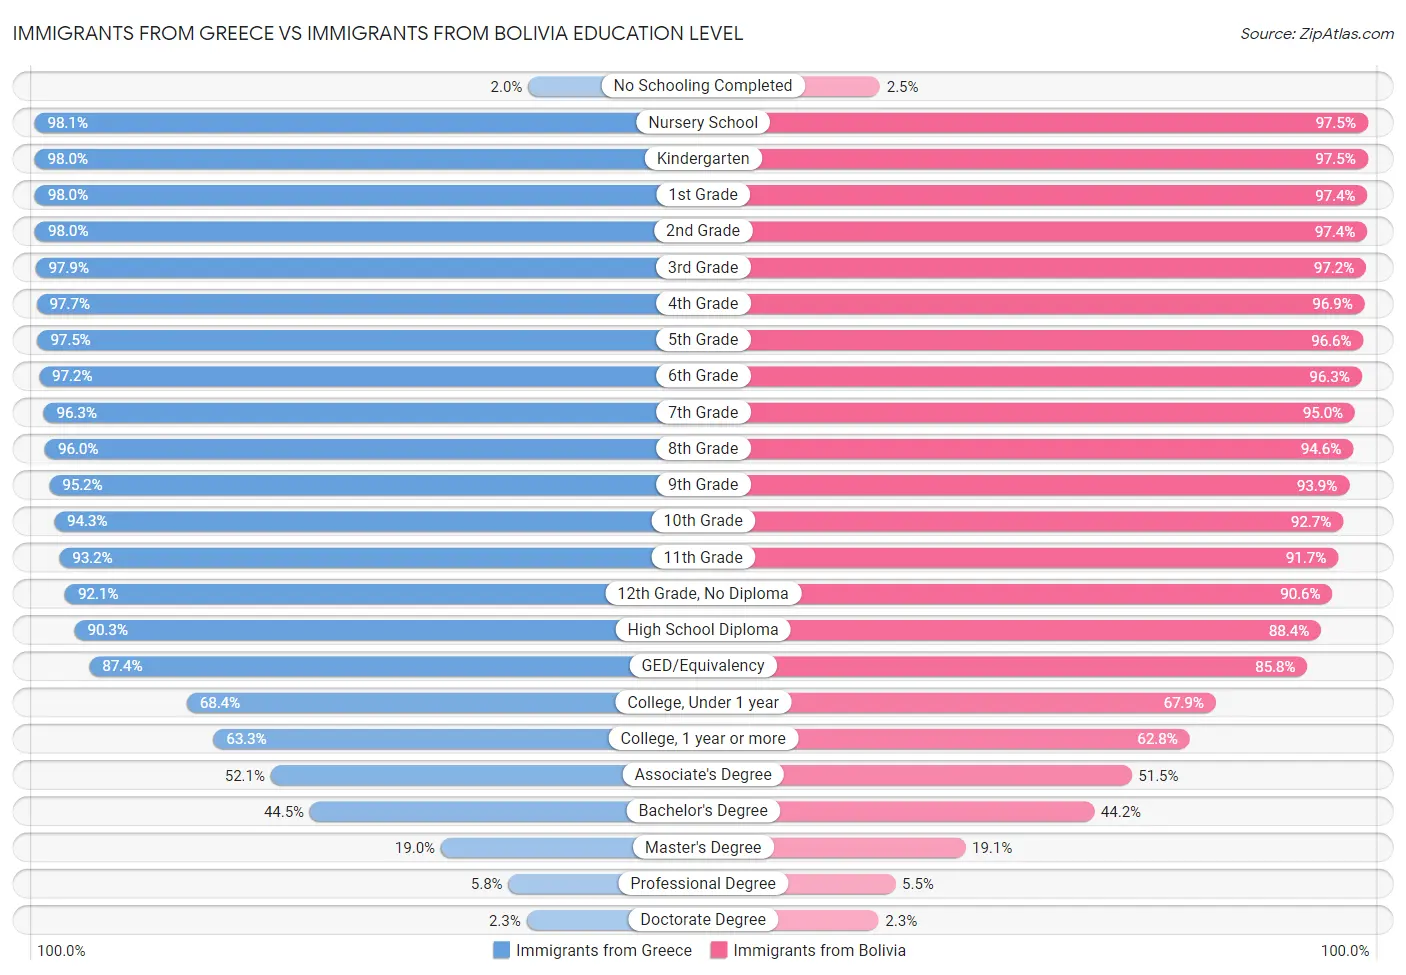 Immigrants from Greece vs Immigrants from Bolivia Education Level